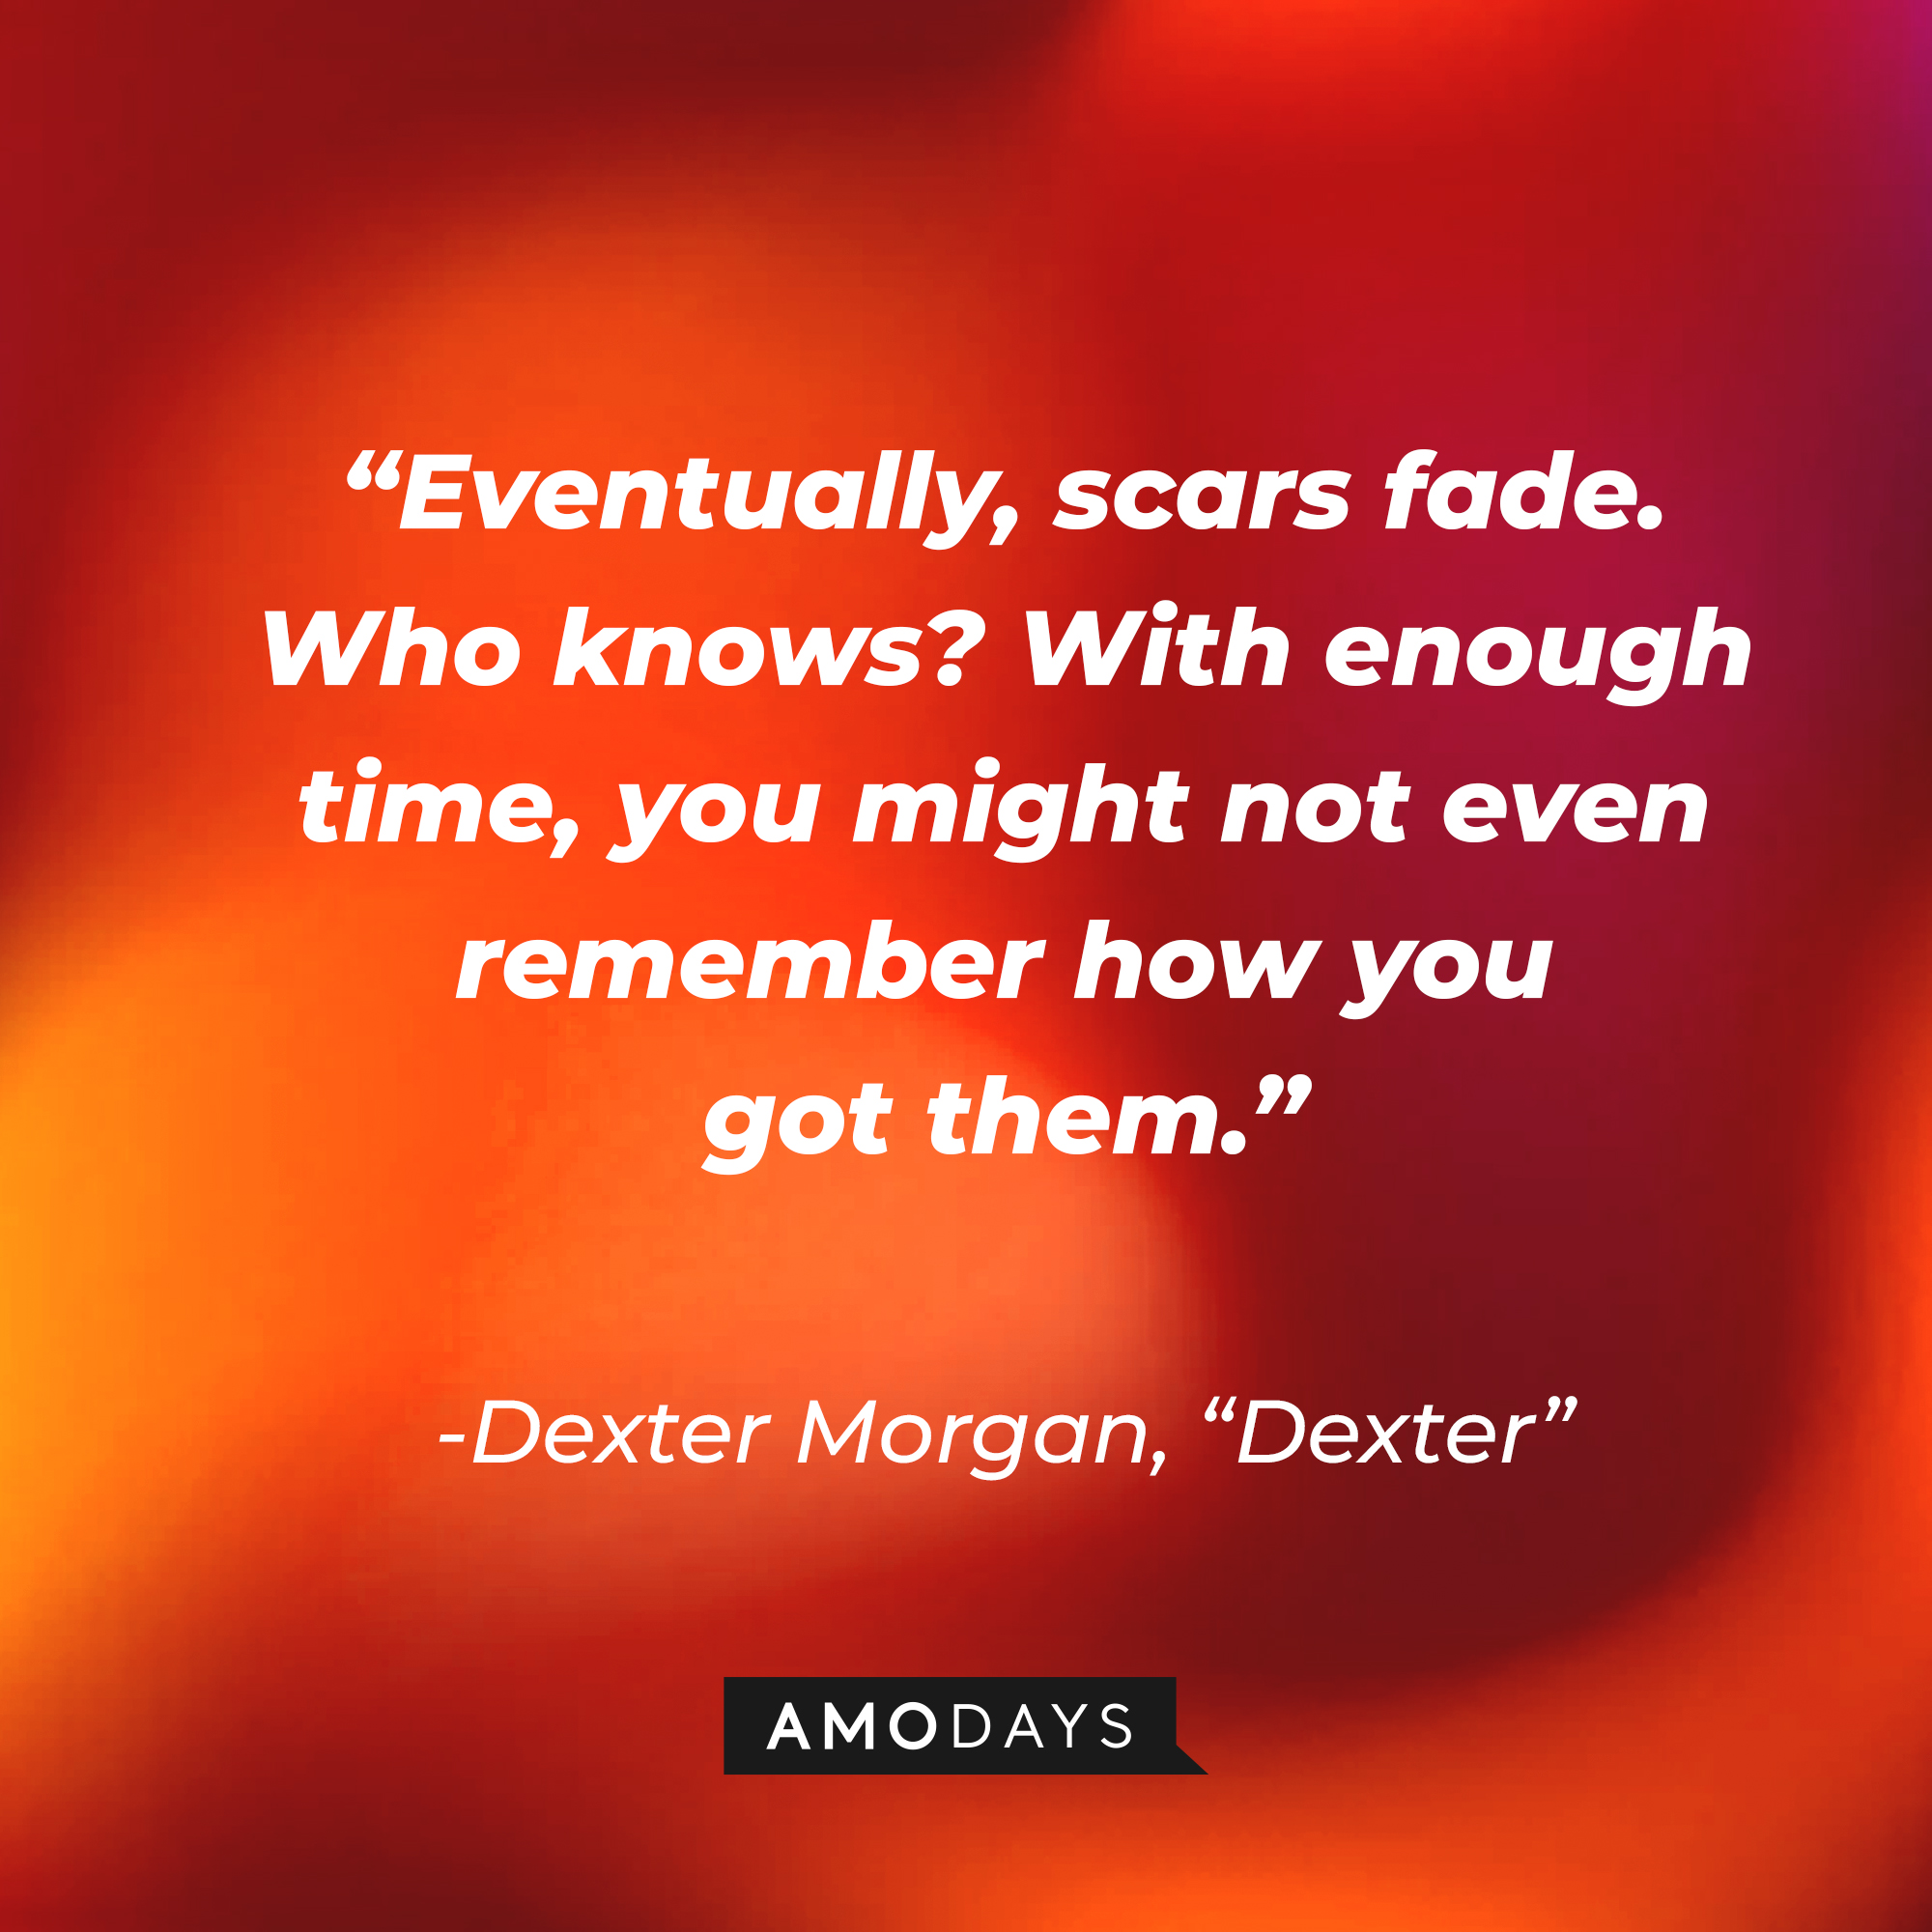 Dexter Morgan's quote from "Dexter:" “Eventually, scars fade. Who knows? With enough time, you might not even remember how you got them.”  | Source: AmoDays